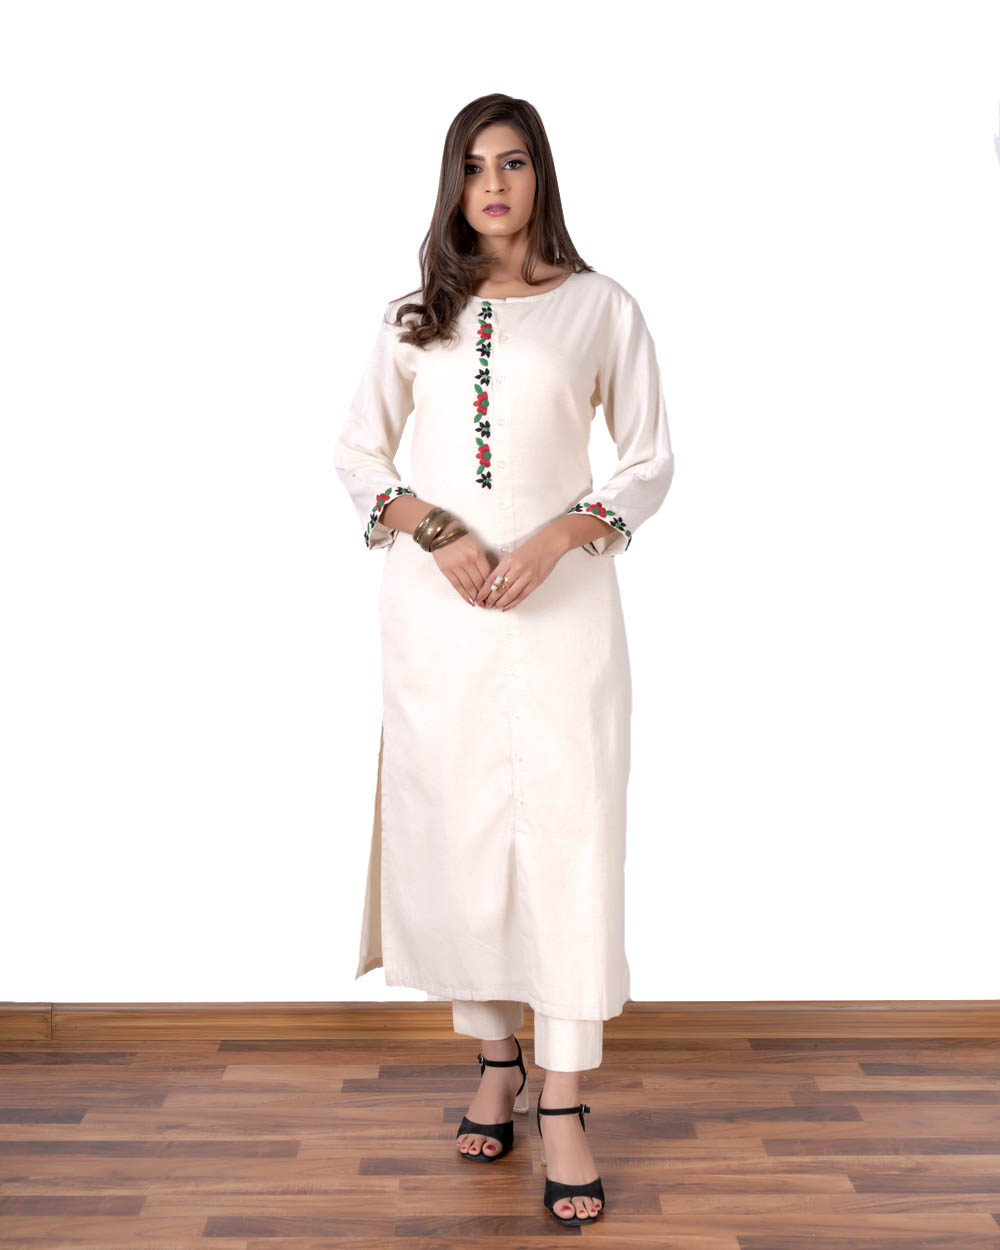 Buy CFM White Kurti With Sleeves And Chicken Border Online  599 from  ShopClues